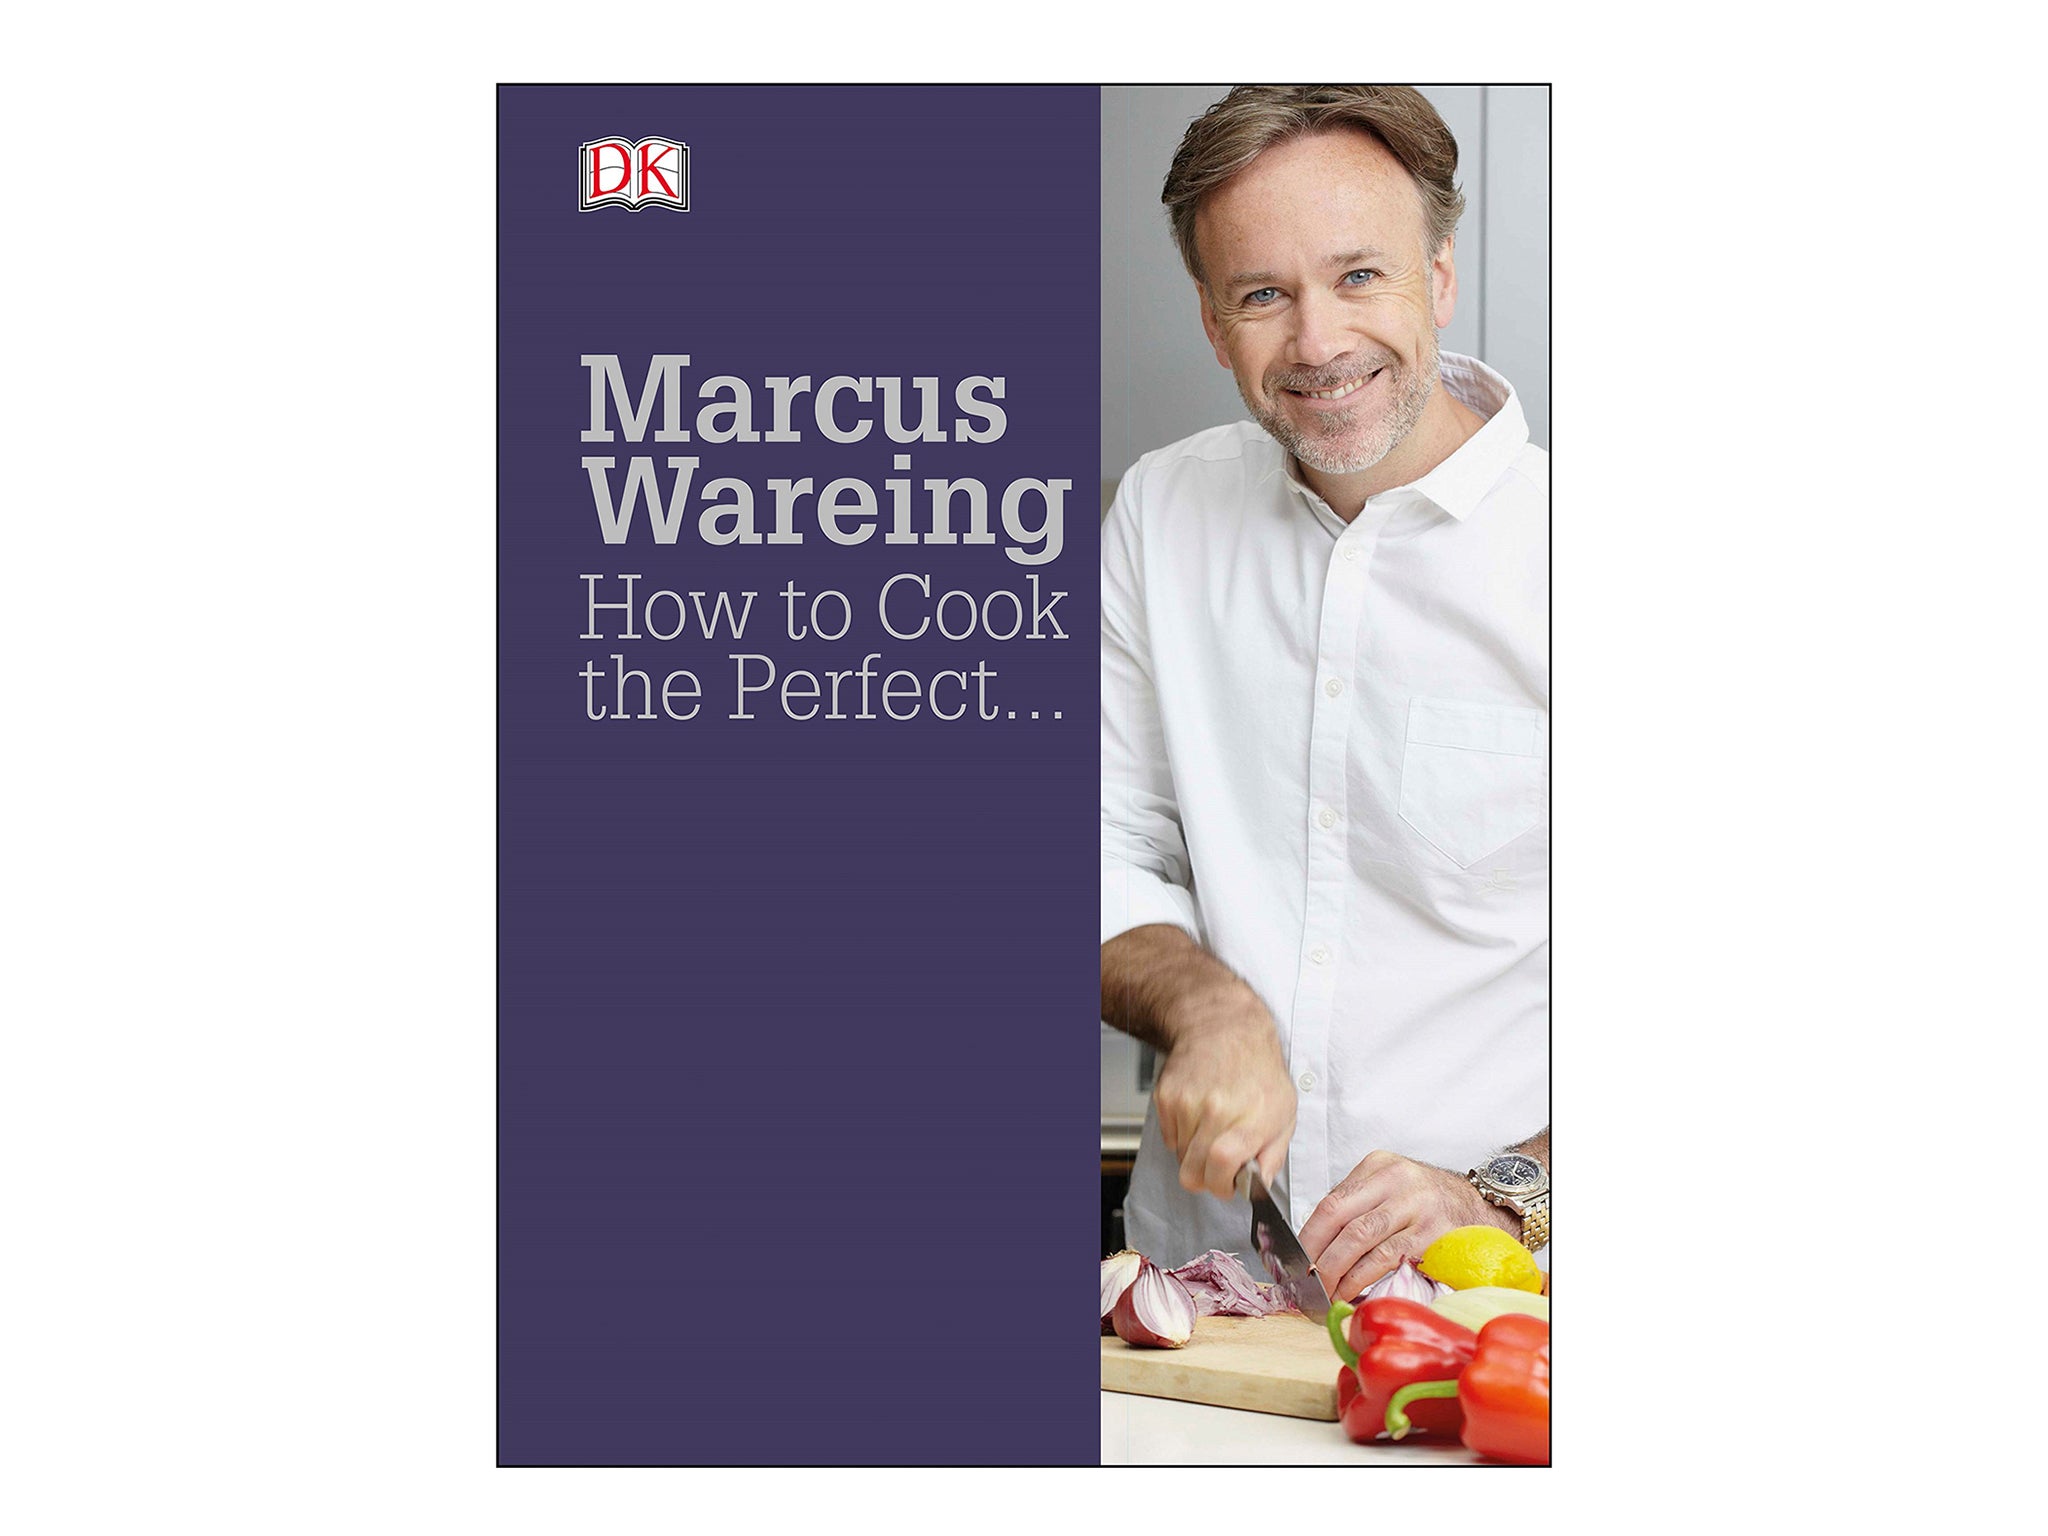 marcus-wareing-how-to-cook-the-perfect-indybest.jpg